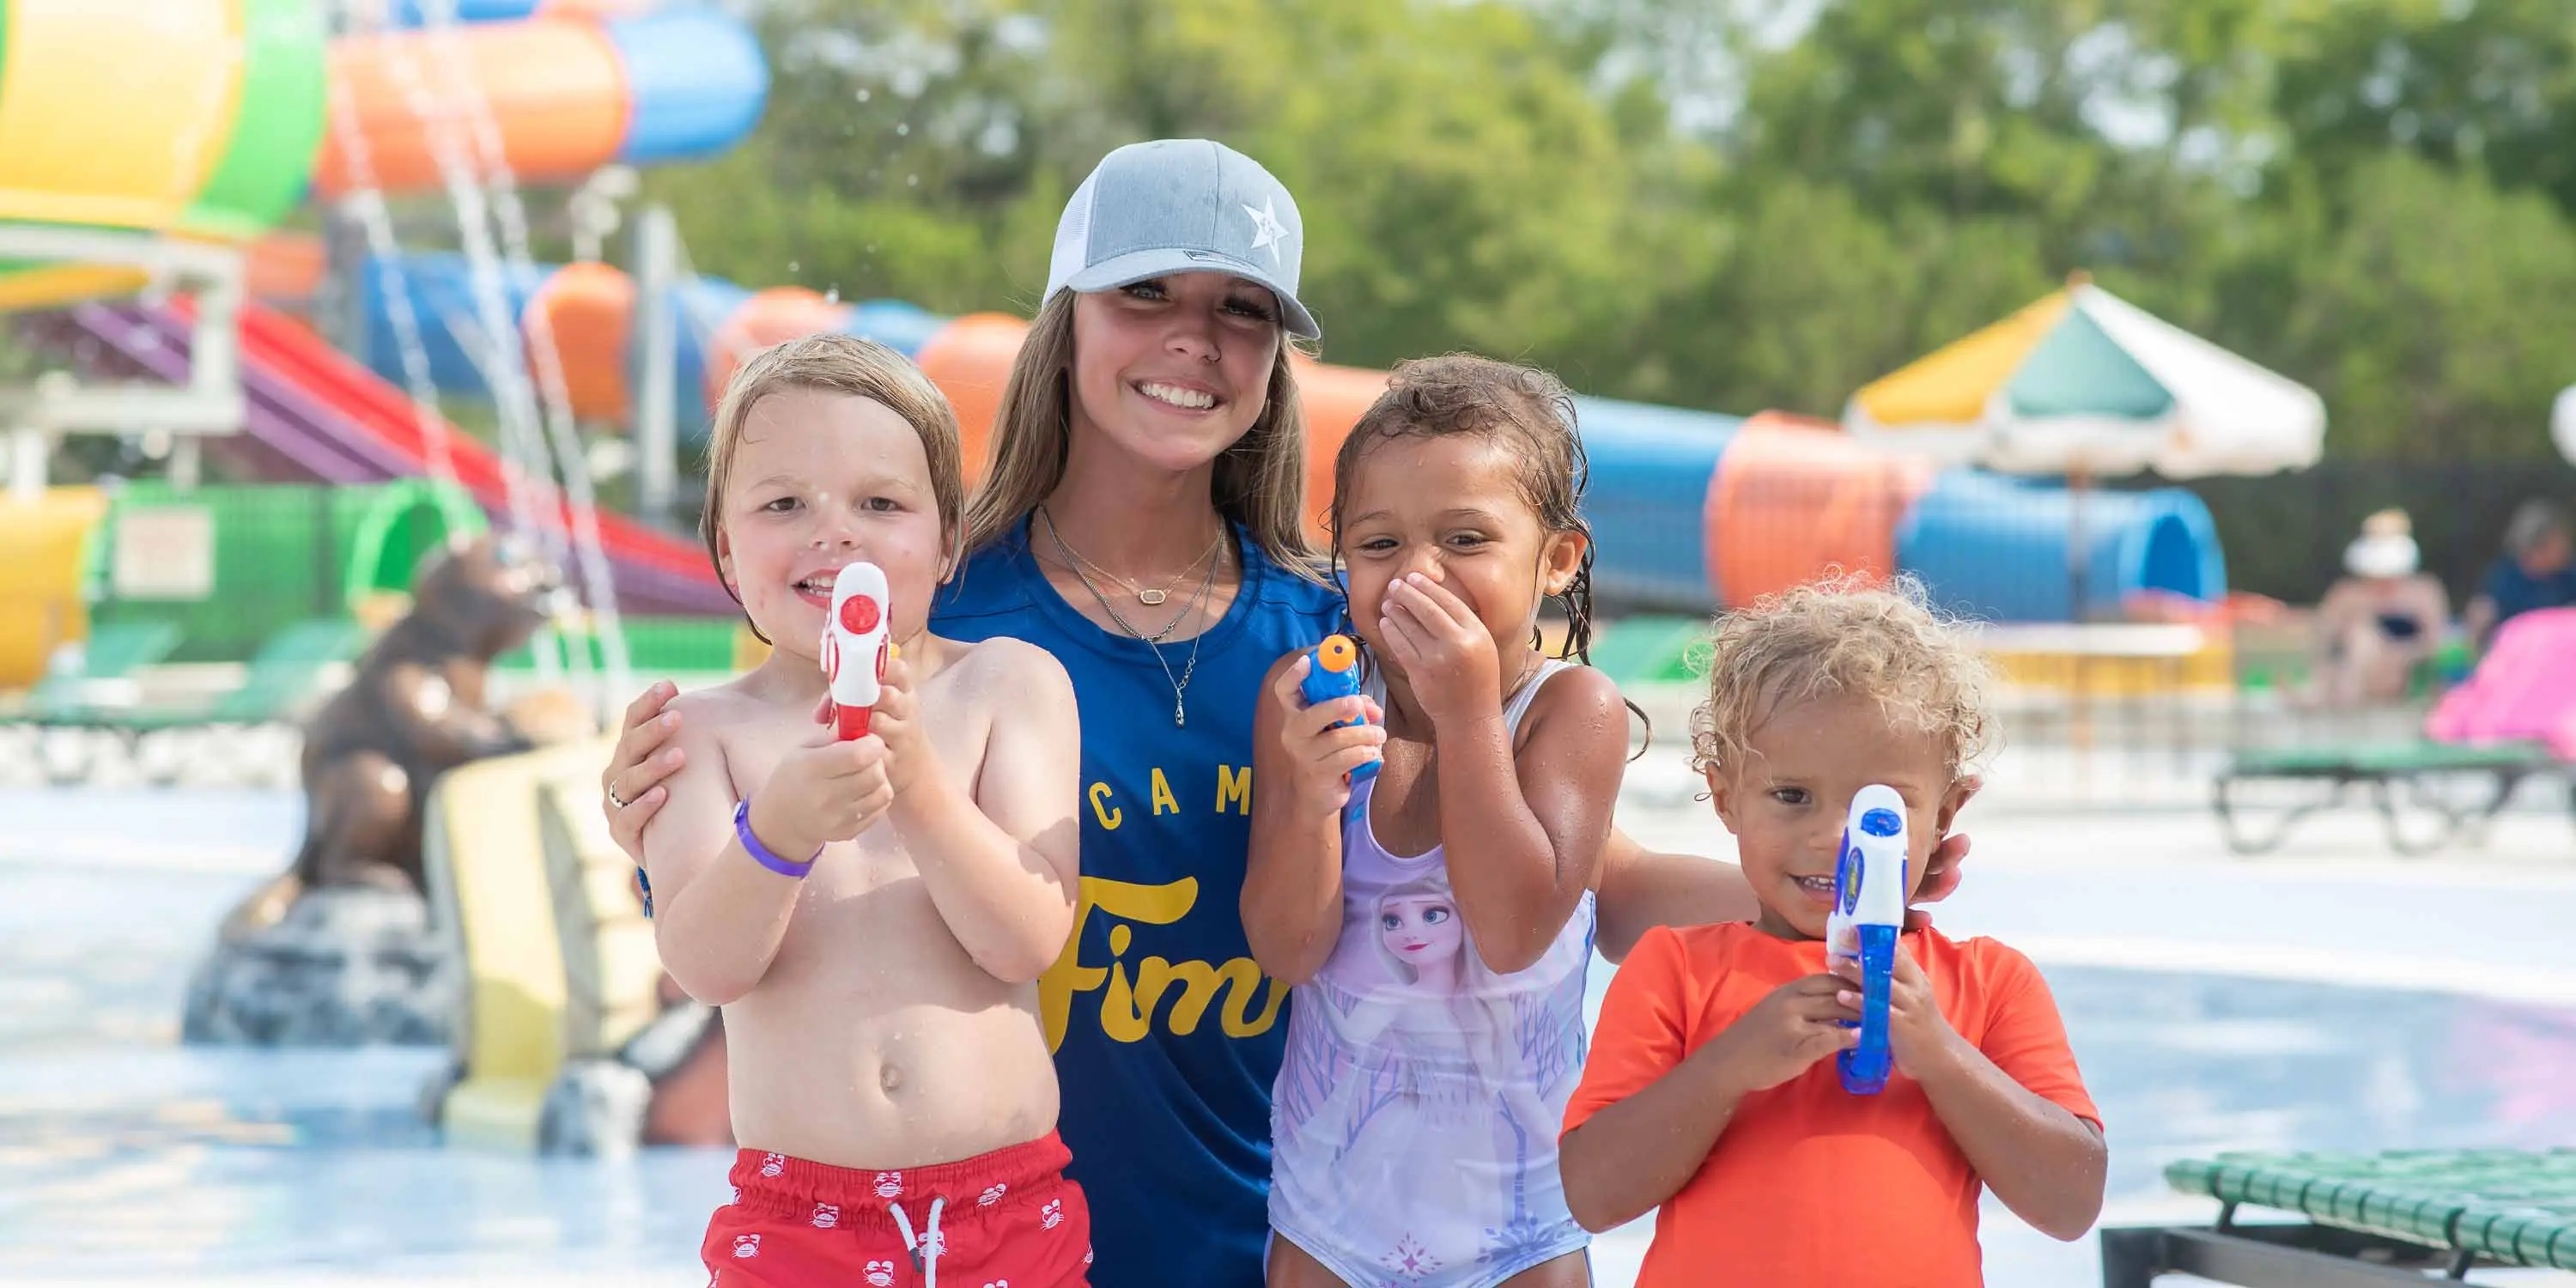 Children posing with a Camp Fimfo staff member at the pool, using squirt guns